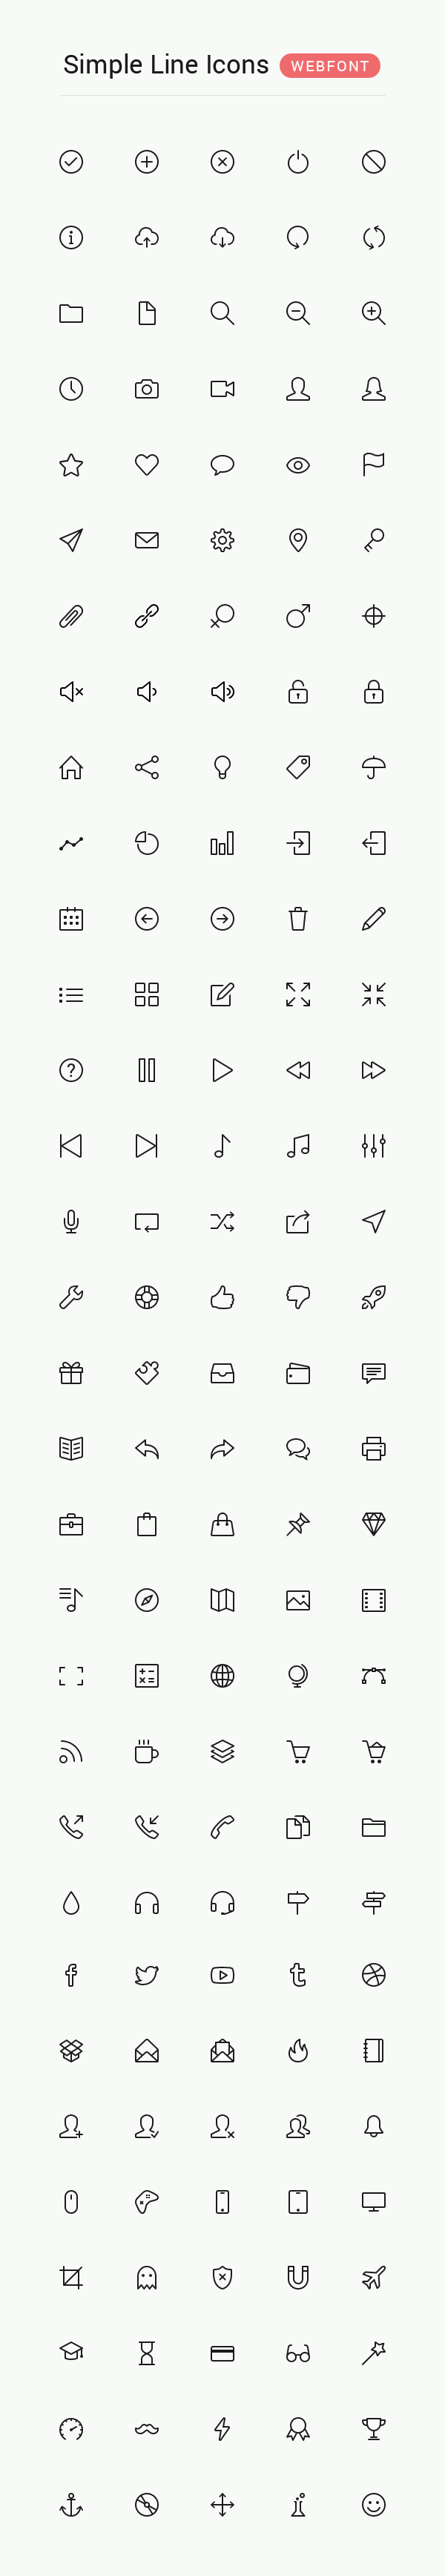 Simple-Line-Icons-Webfont